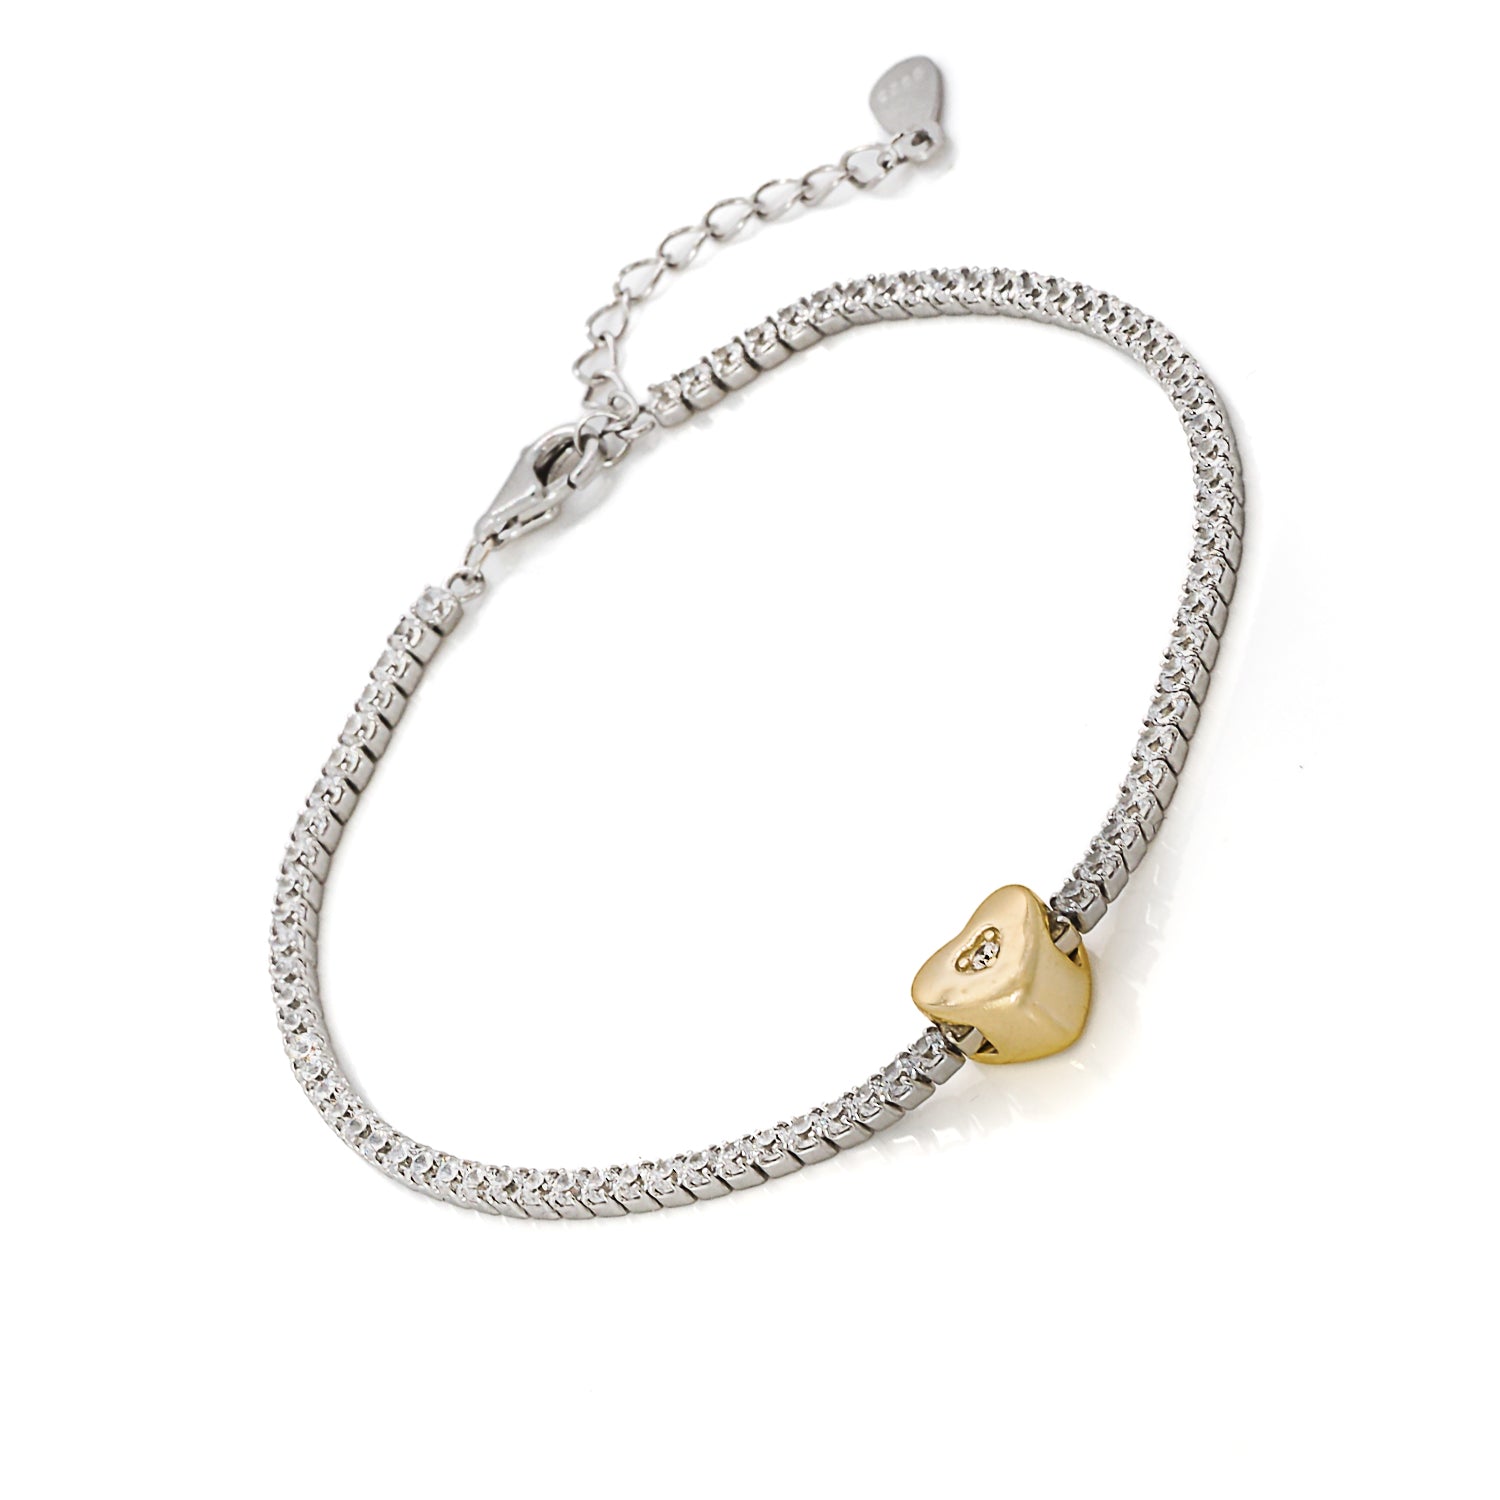 Sterling silver base, gold-plated heart: Handmade brilliance.